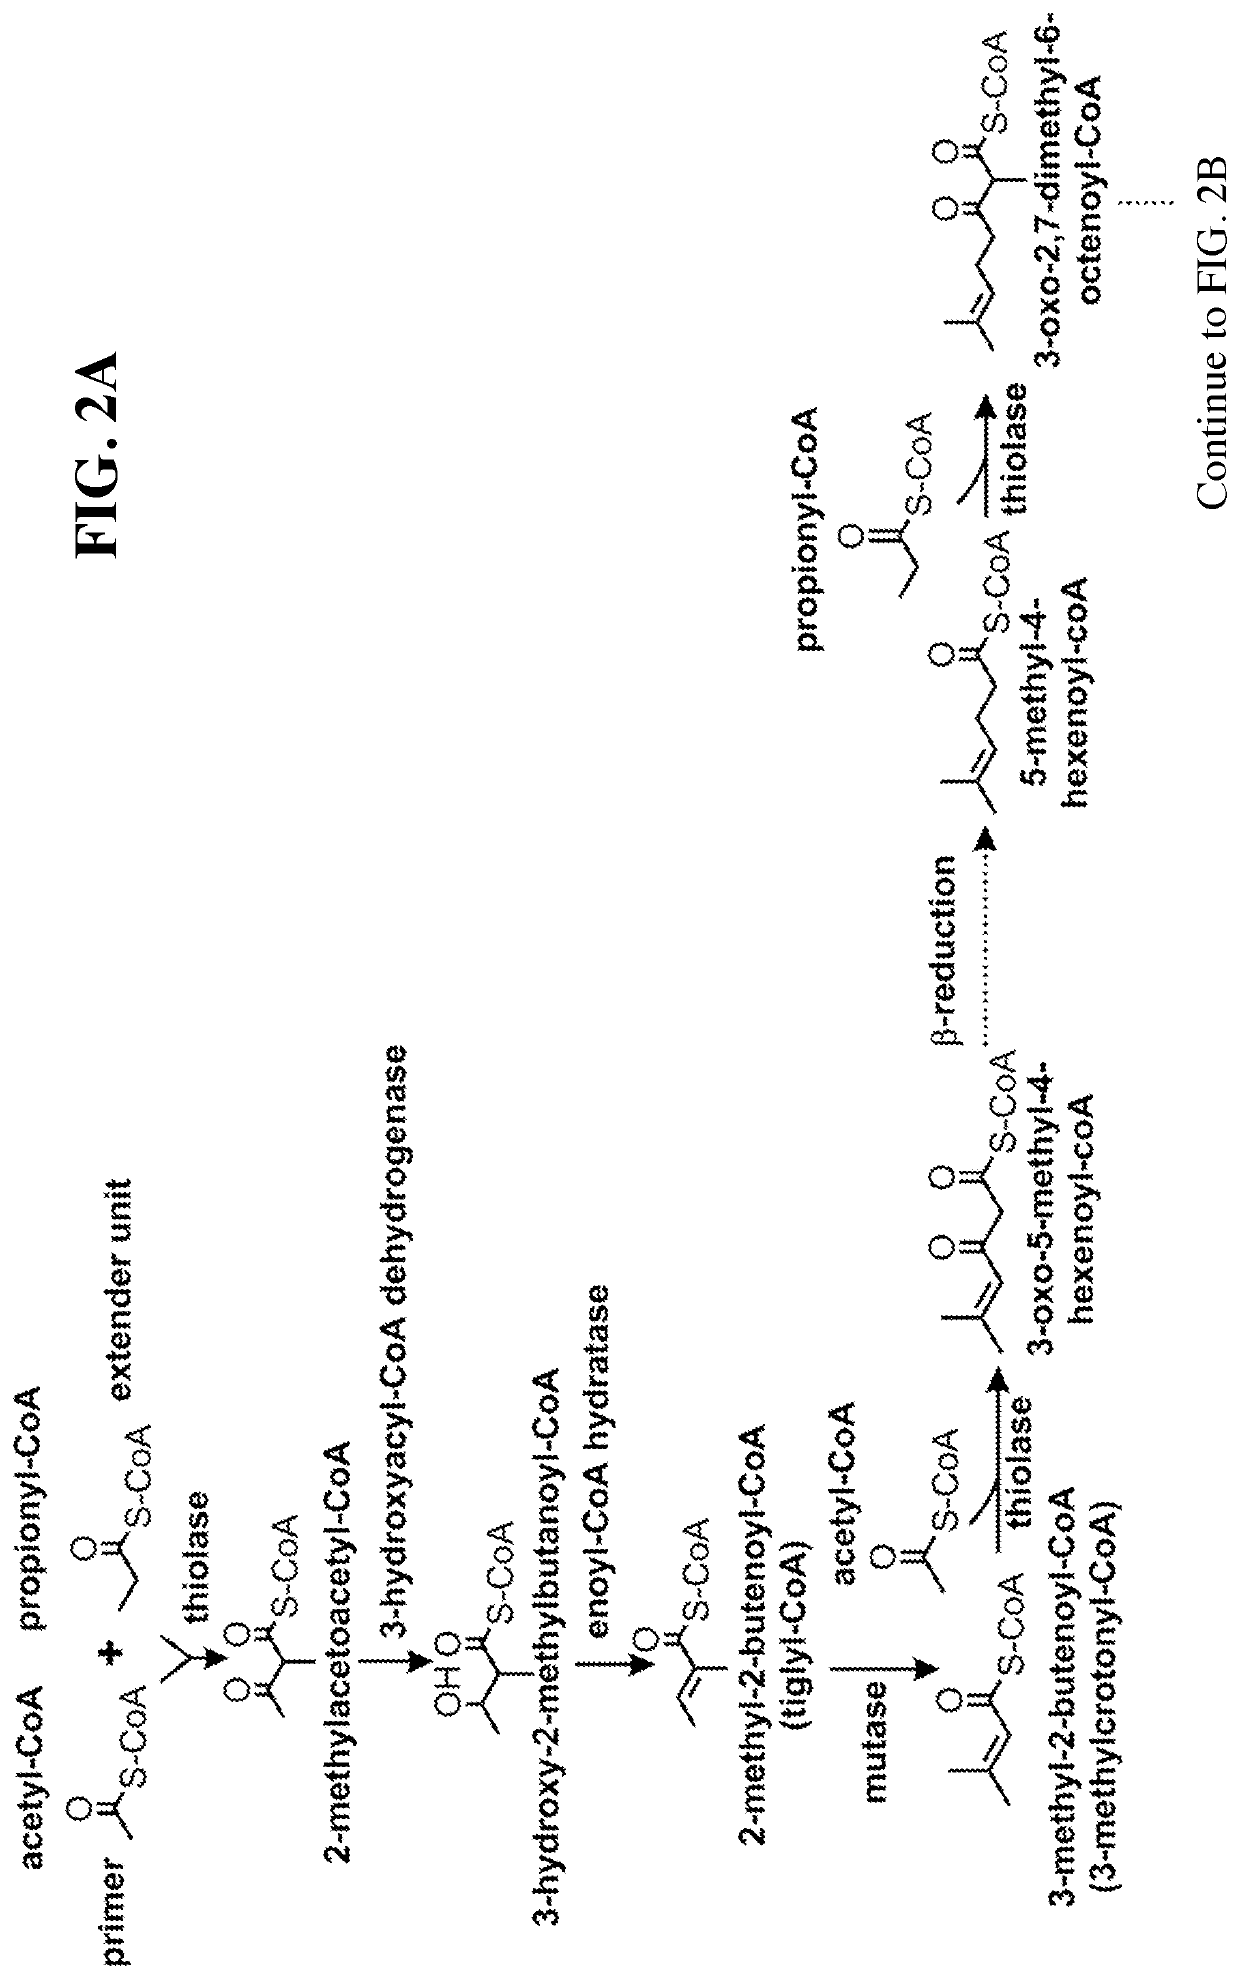 Synthesis of isoprenoids and derivatives